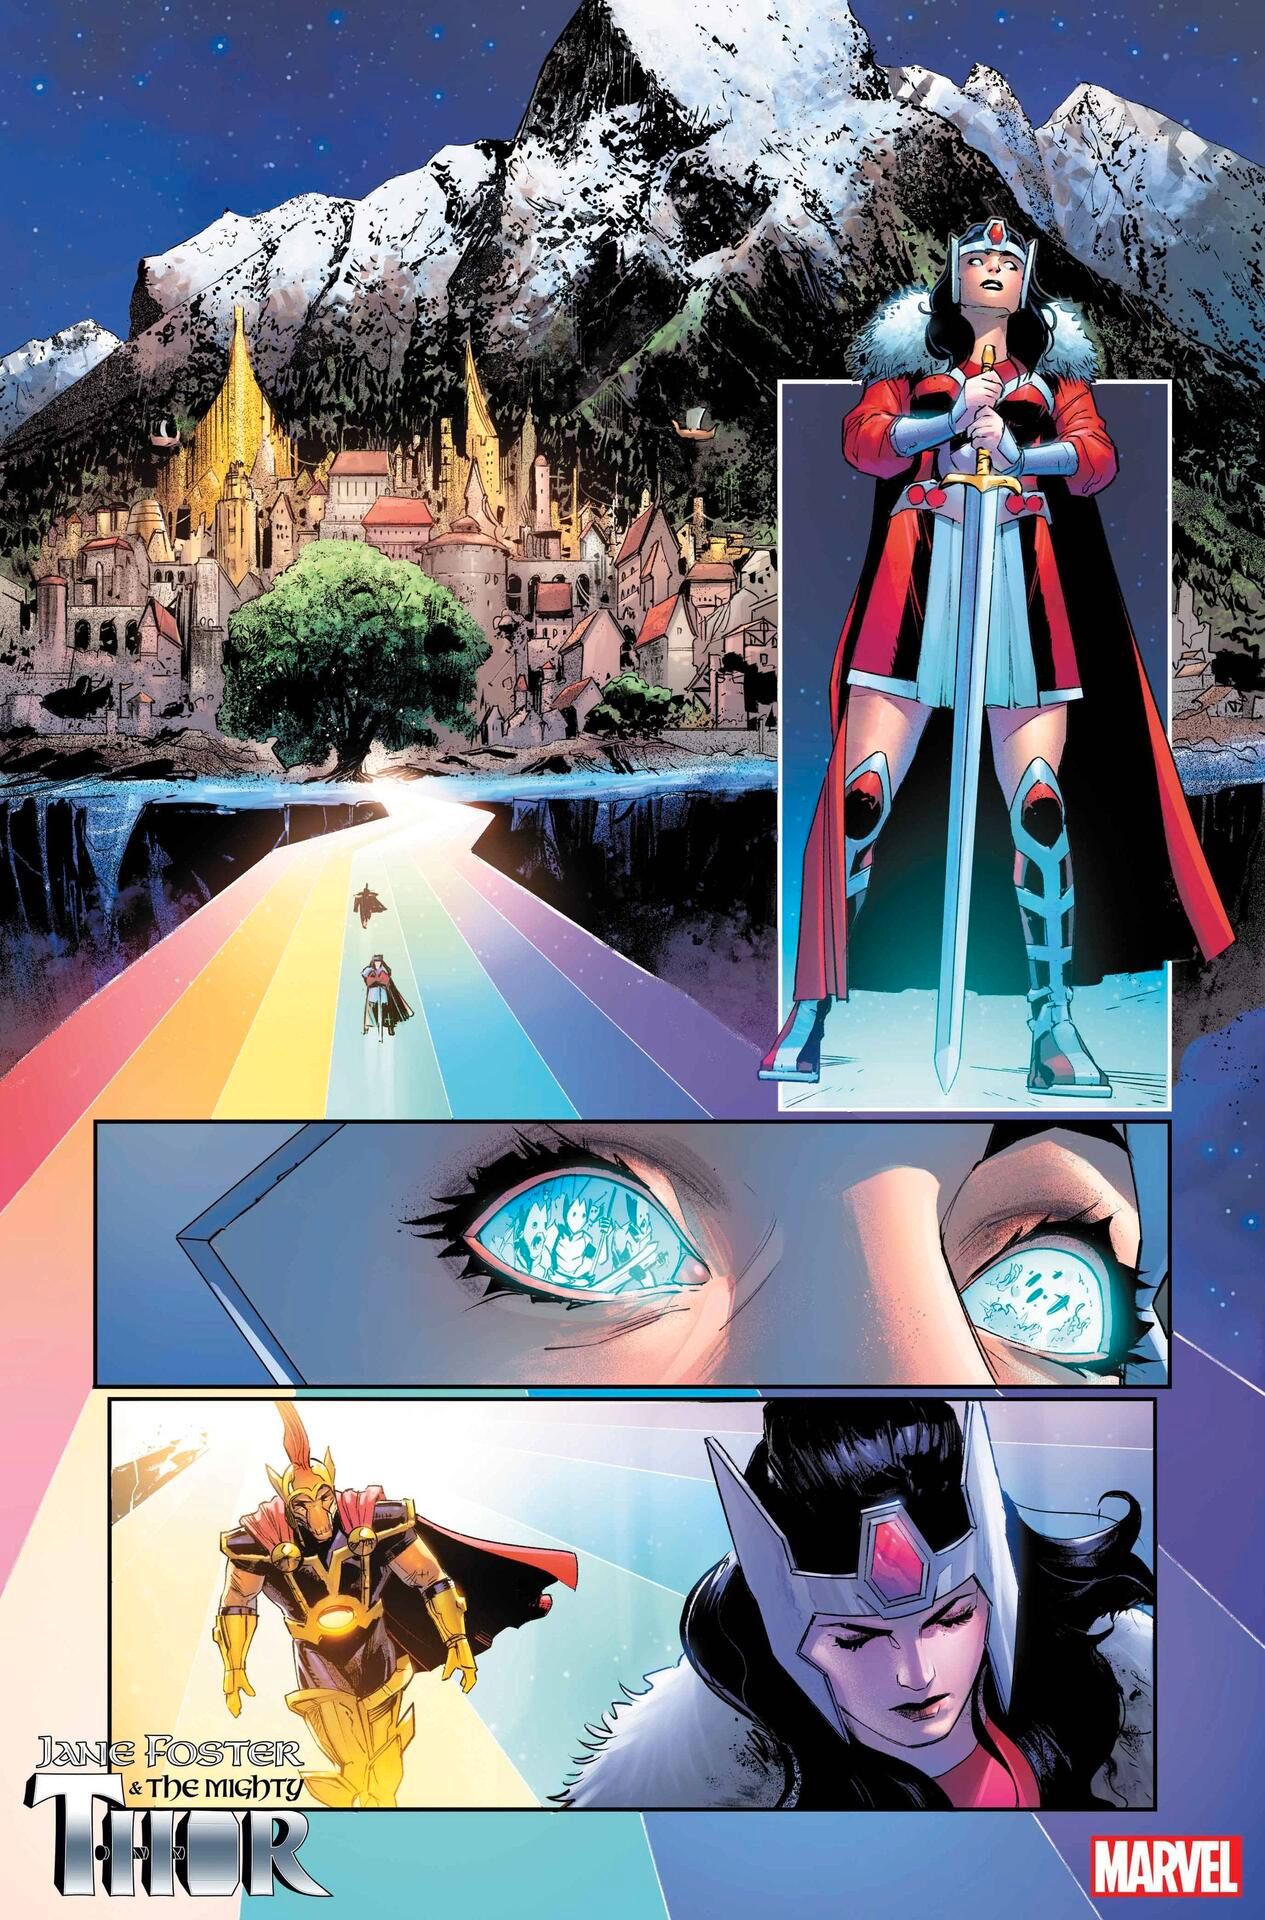 Jane Foster & The Mighty Thor #1 - plansze